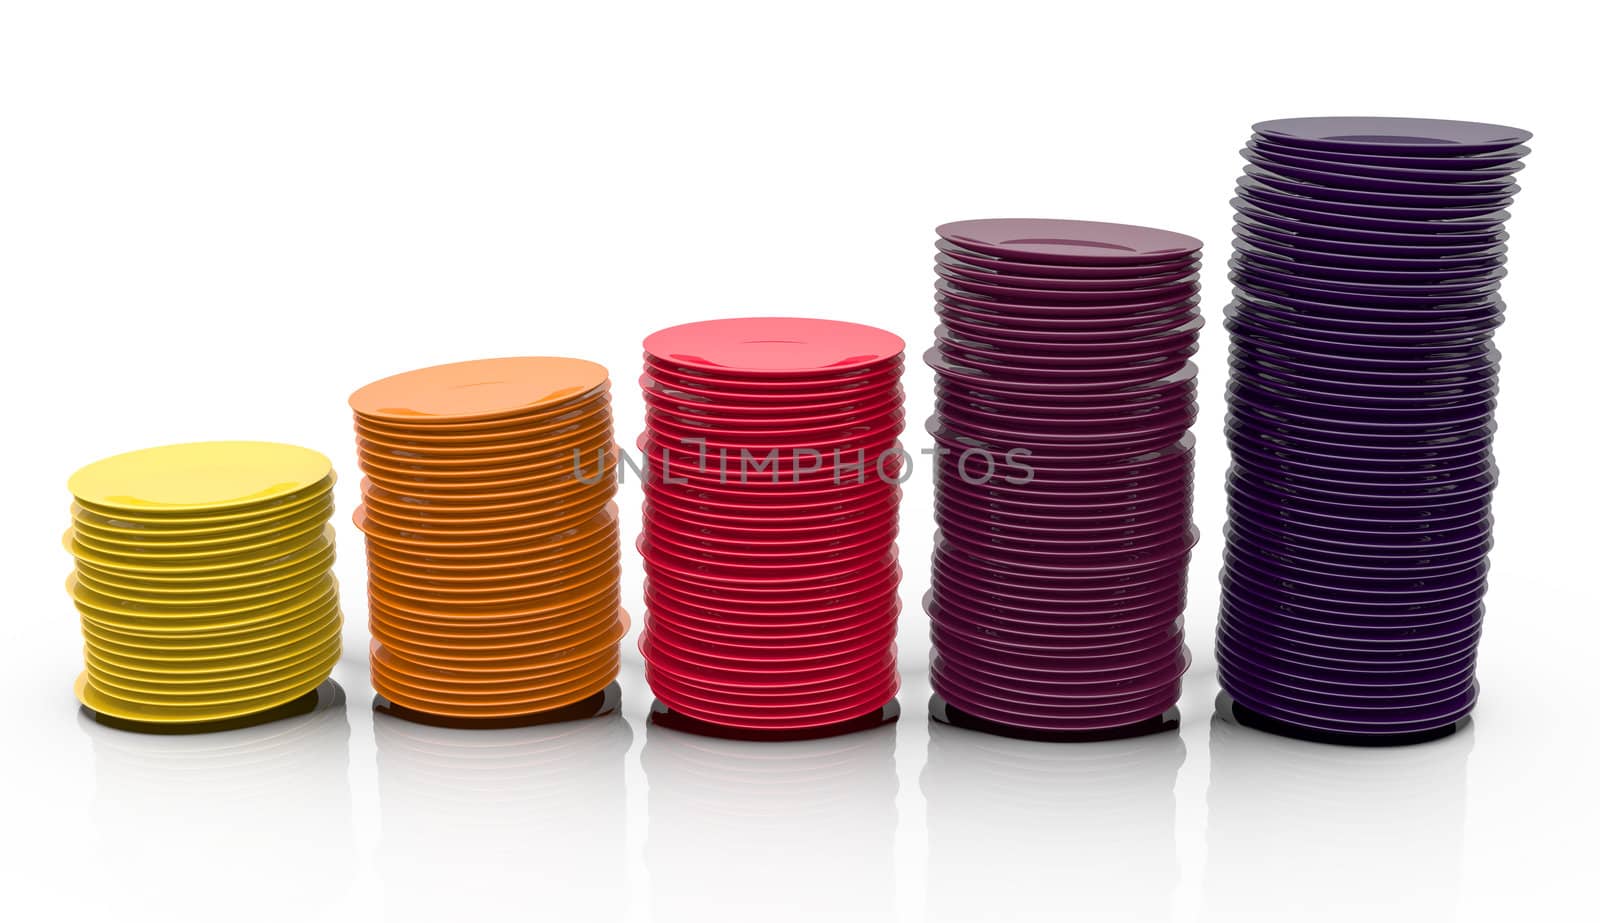 Colorful stack of plates in a chart-like composition. 3D render.